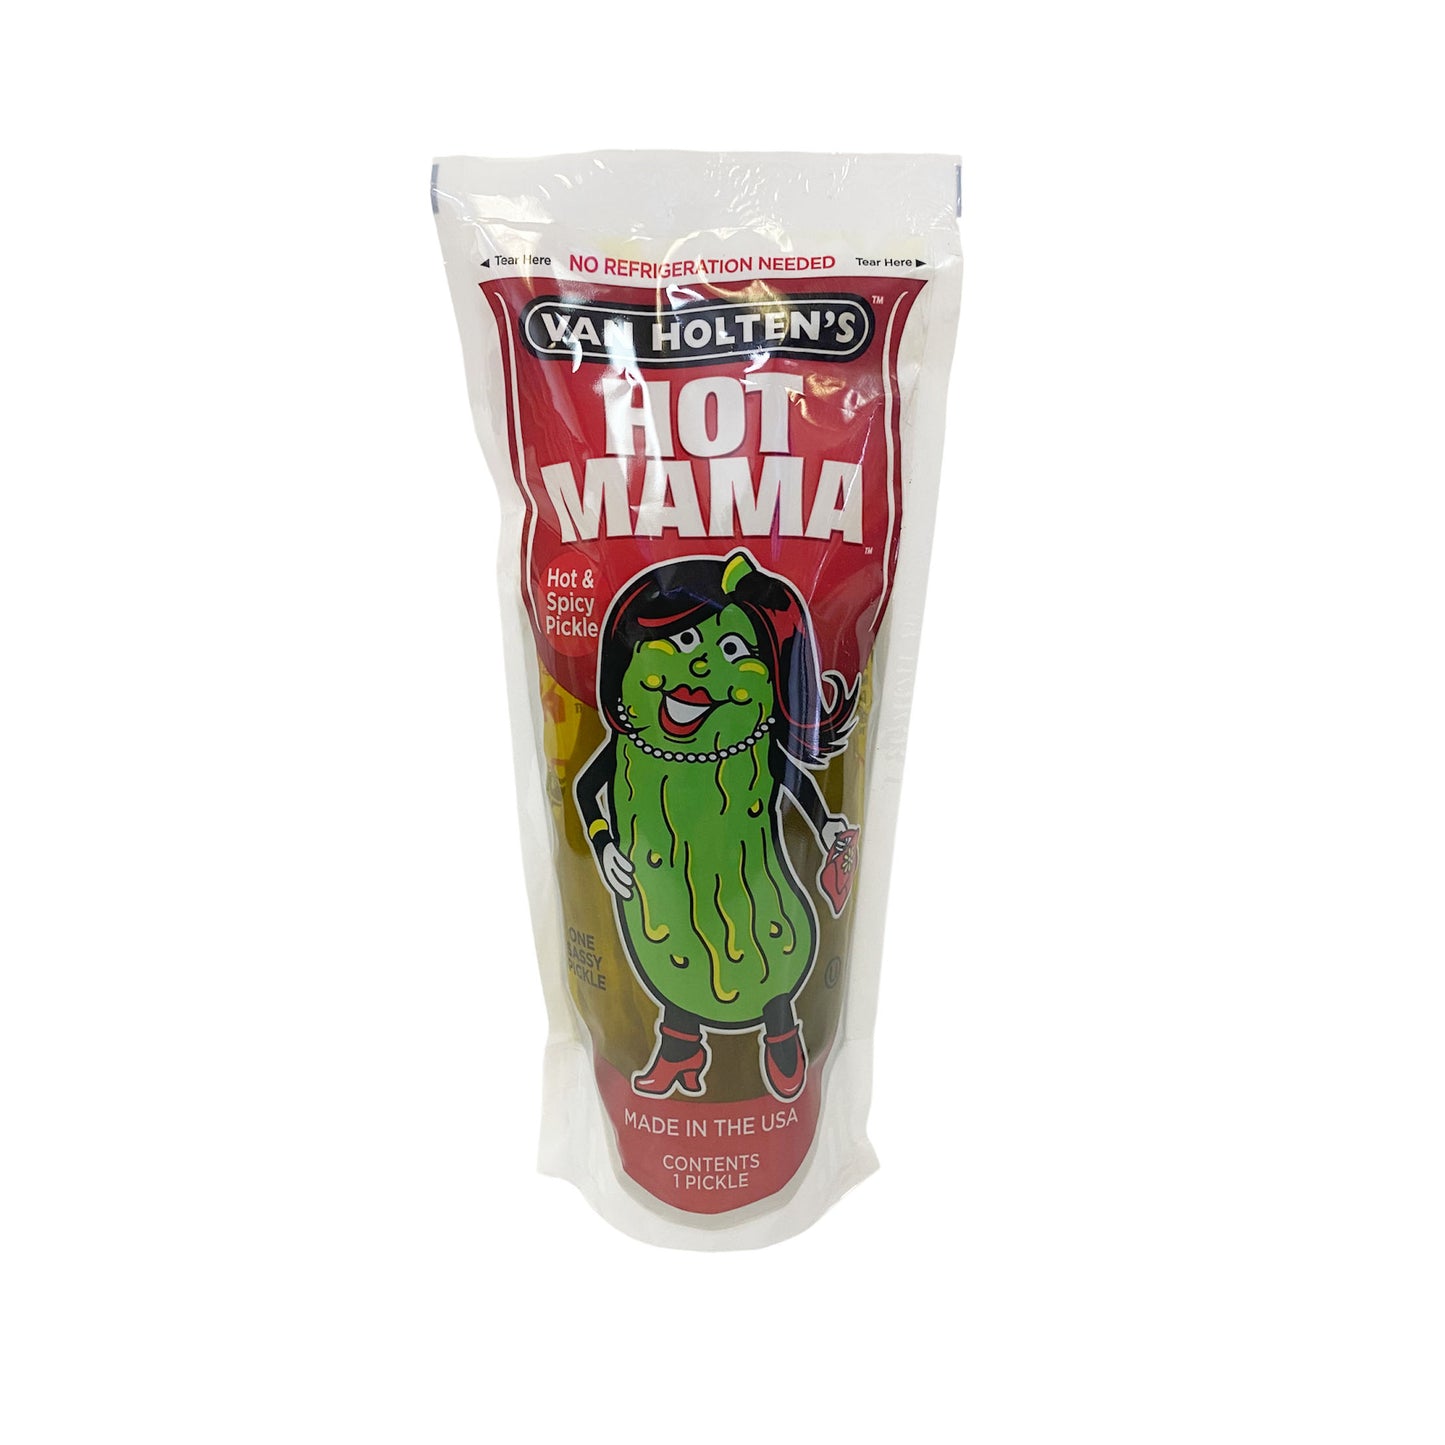 Van Holten's Pickle-In-A-Pouch Hot Mama